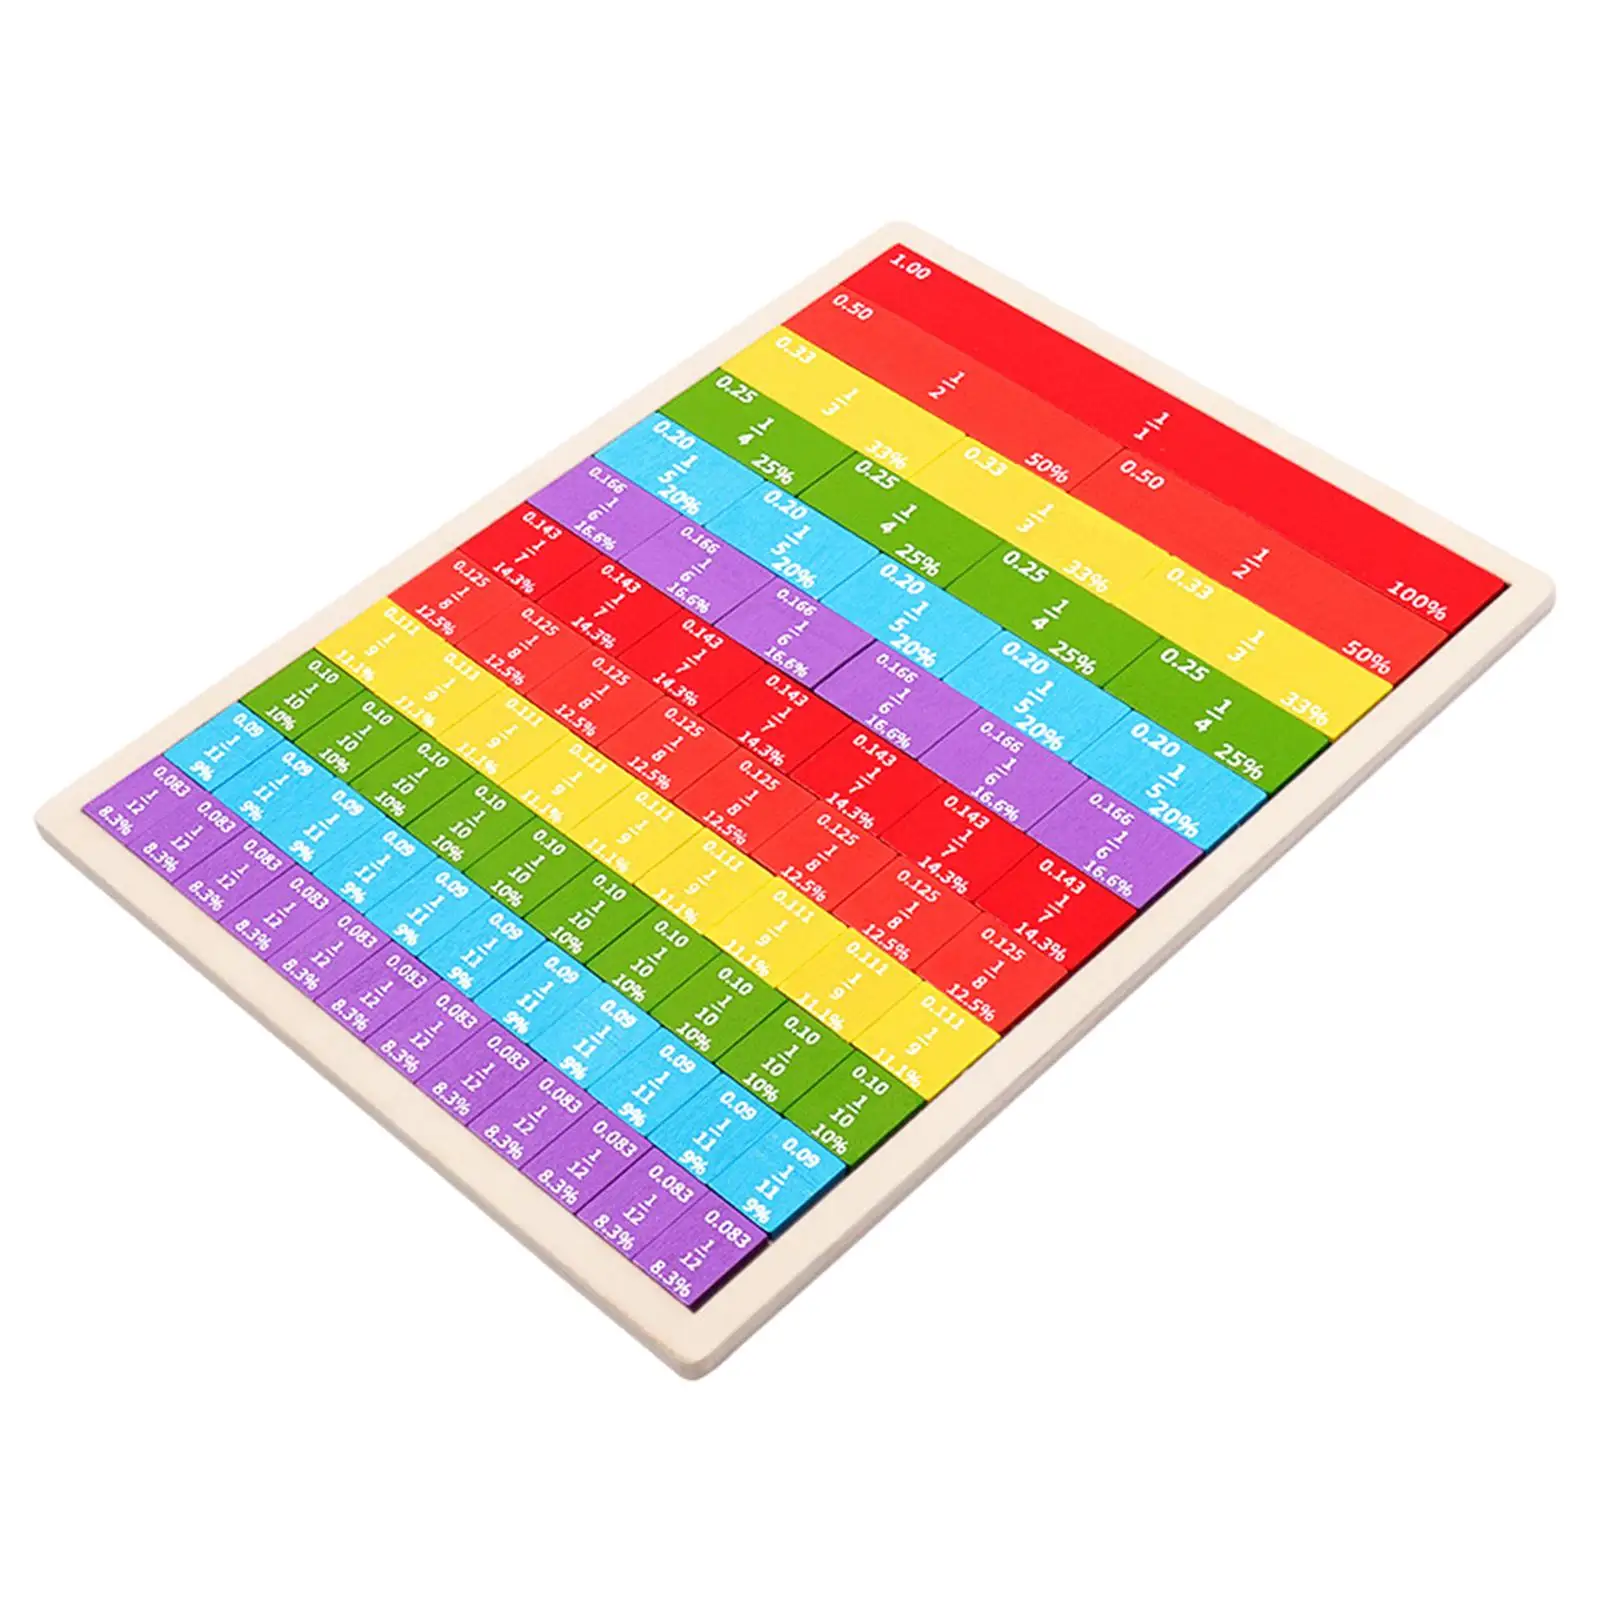 Fraction Tiles Education Toy Math Learning Tiles Math Skills Teach Fractions, Decimals and Percent Equivalents for Classroom